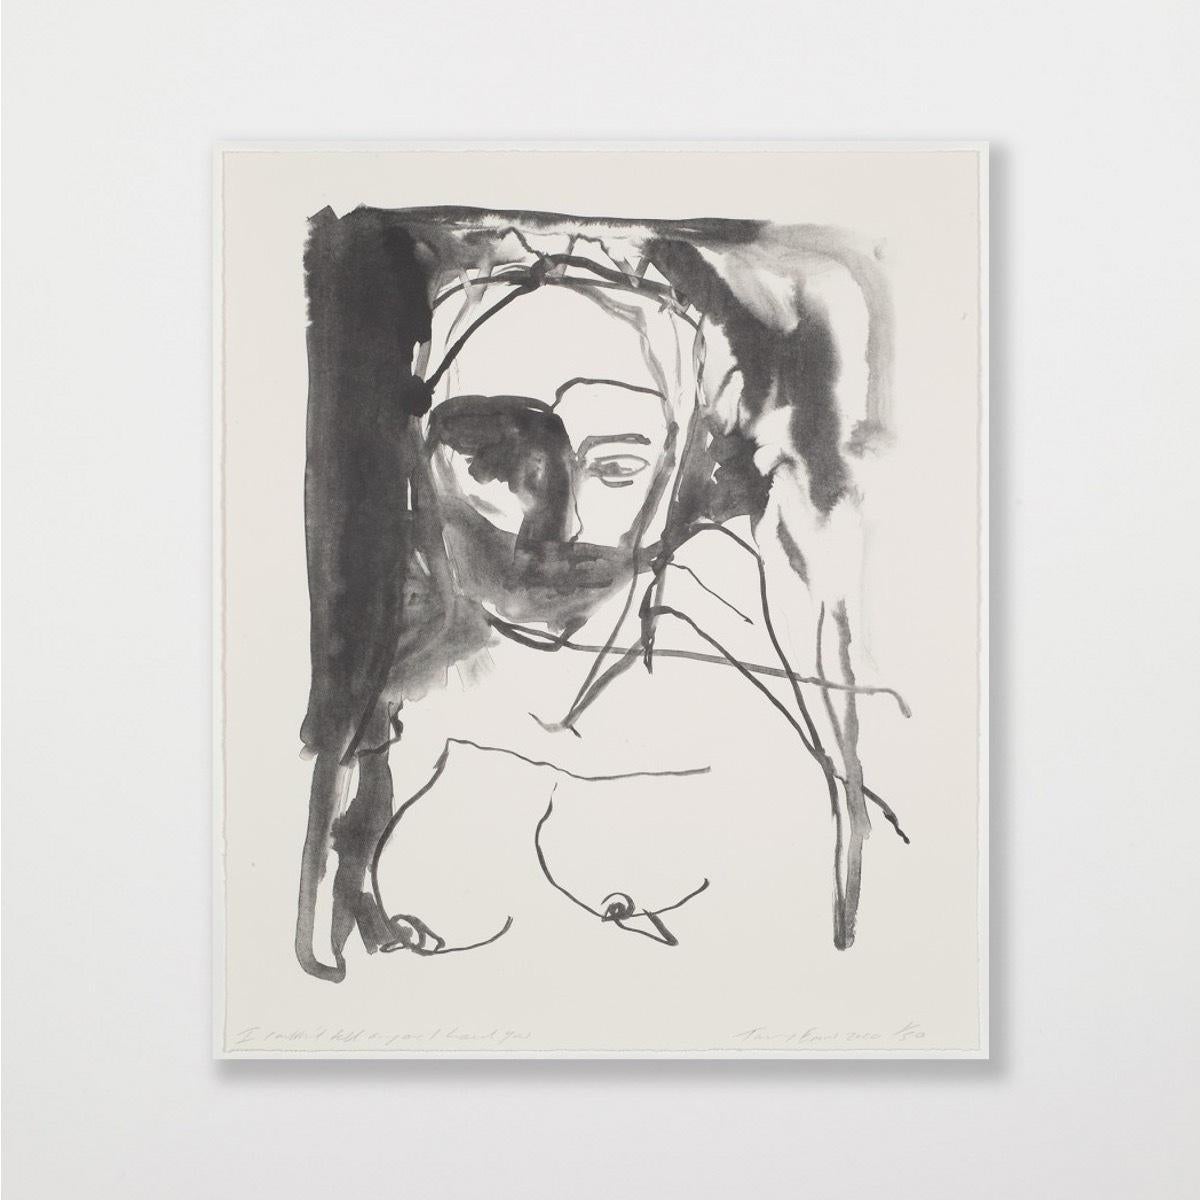 These Feelings Were True -Emin, Contemporary, YBAs, Lithograph, Blue, Portrait - Gray Portrait Print by Tracey Emin